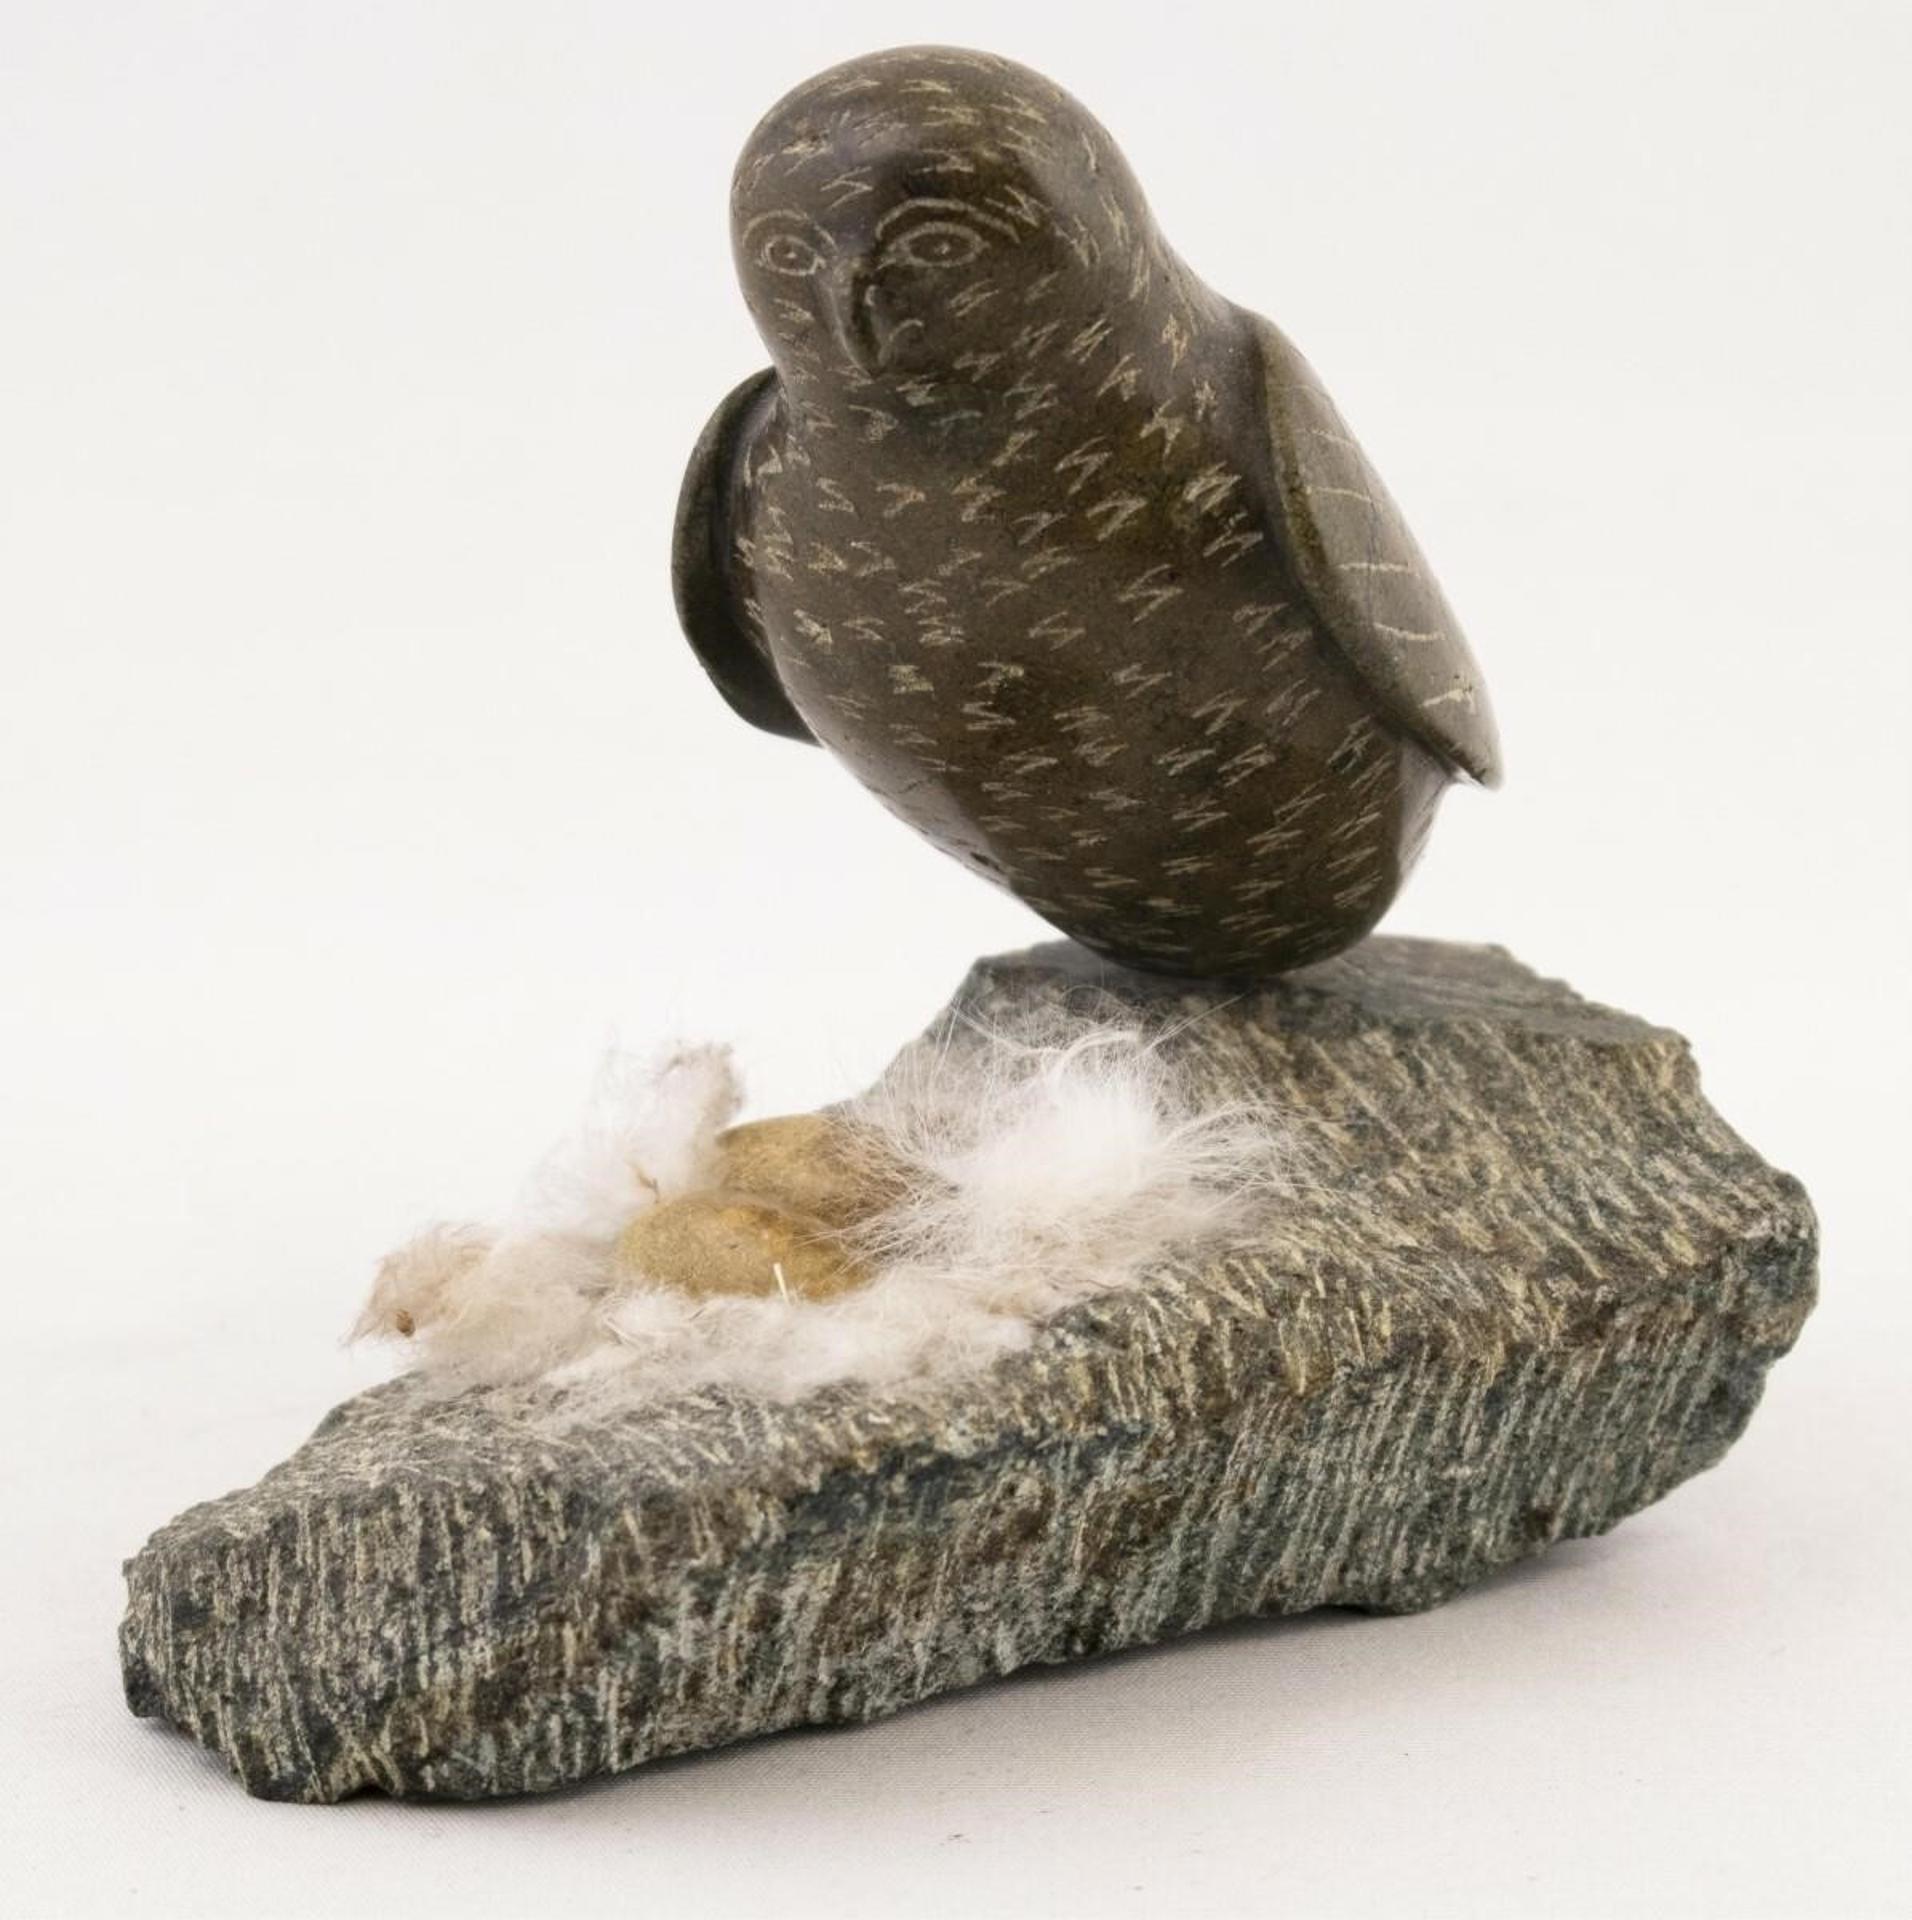 Kavavow King (1939) - a green and brown stone carving of an Owl Guarding Eggs in a Nest